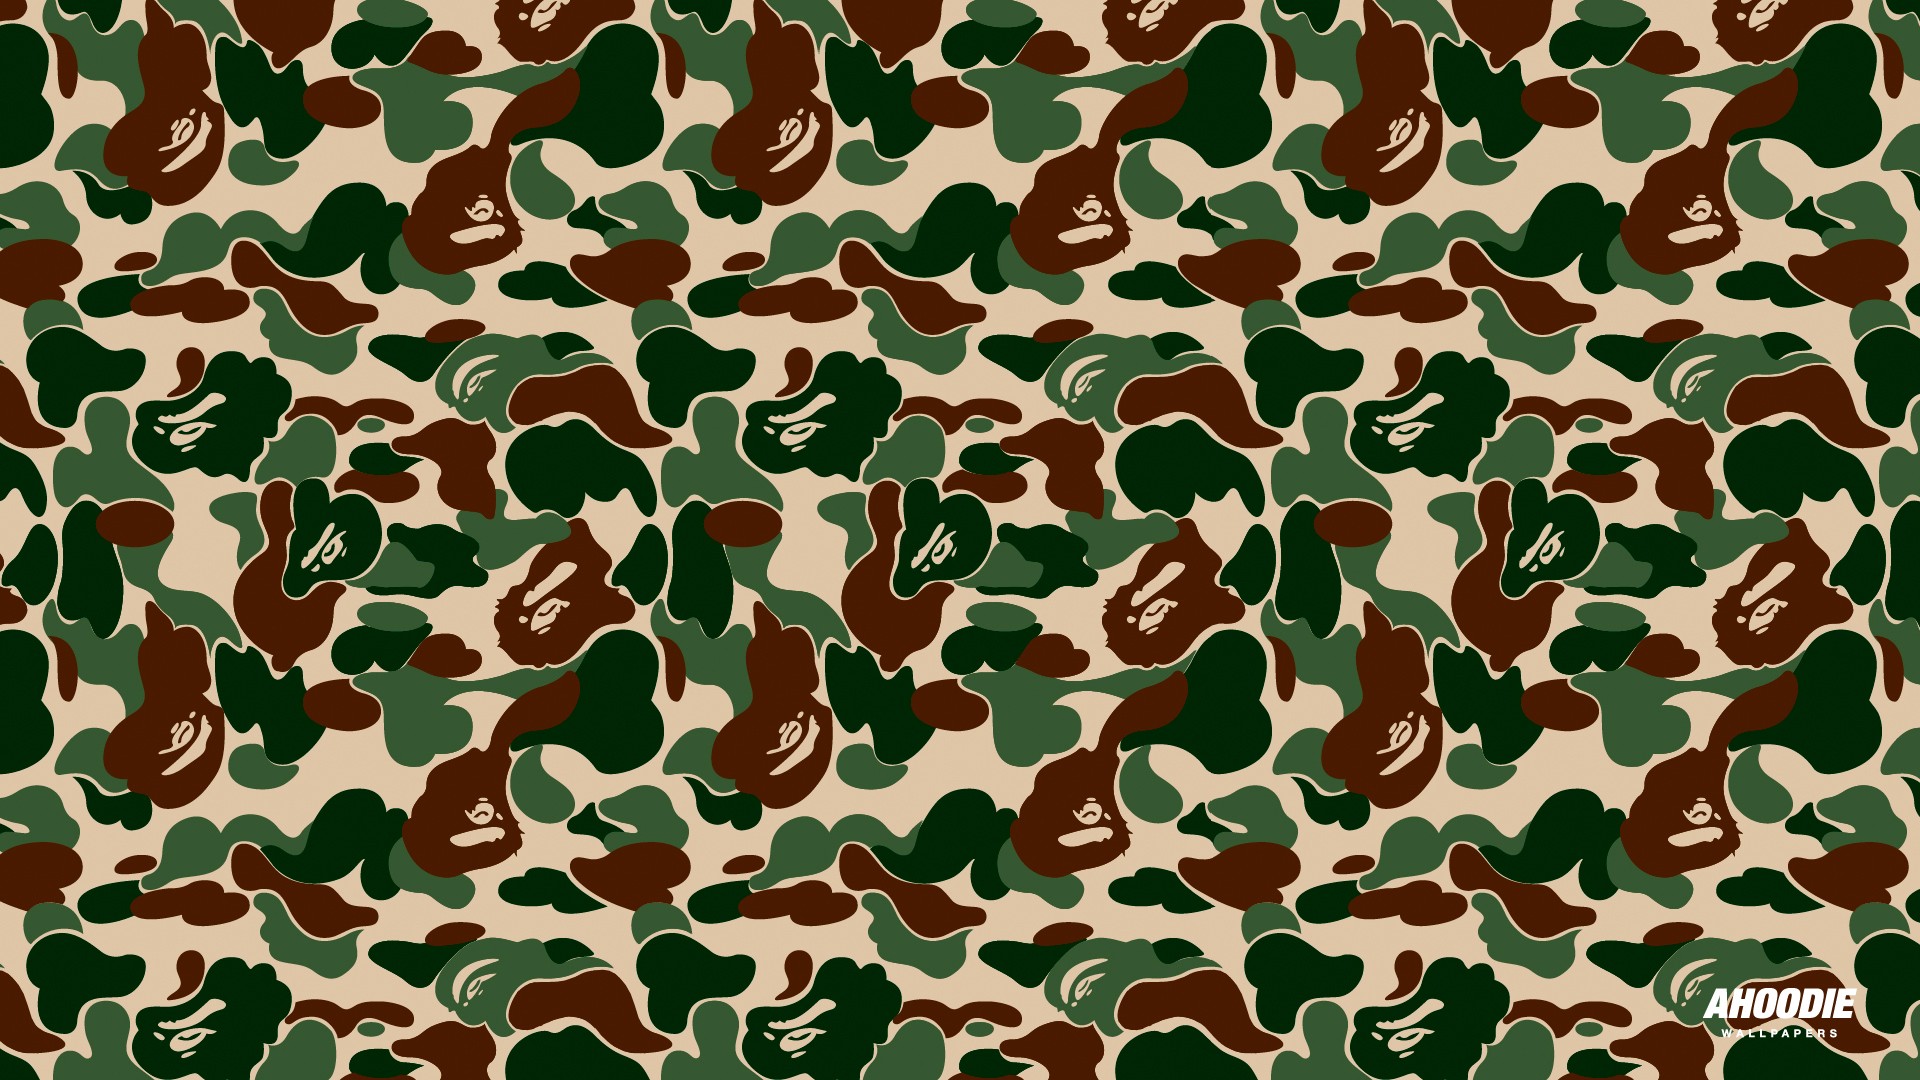 General 1920x1080 clothing pattern camouflage texture BAPE watermarked urban camo